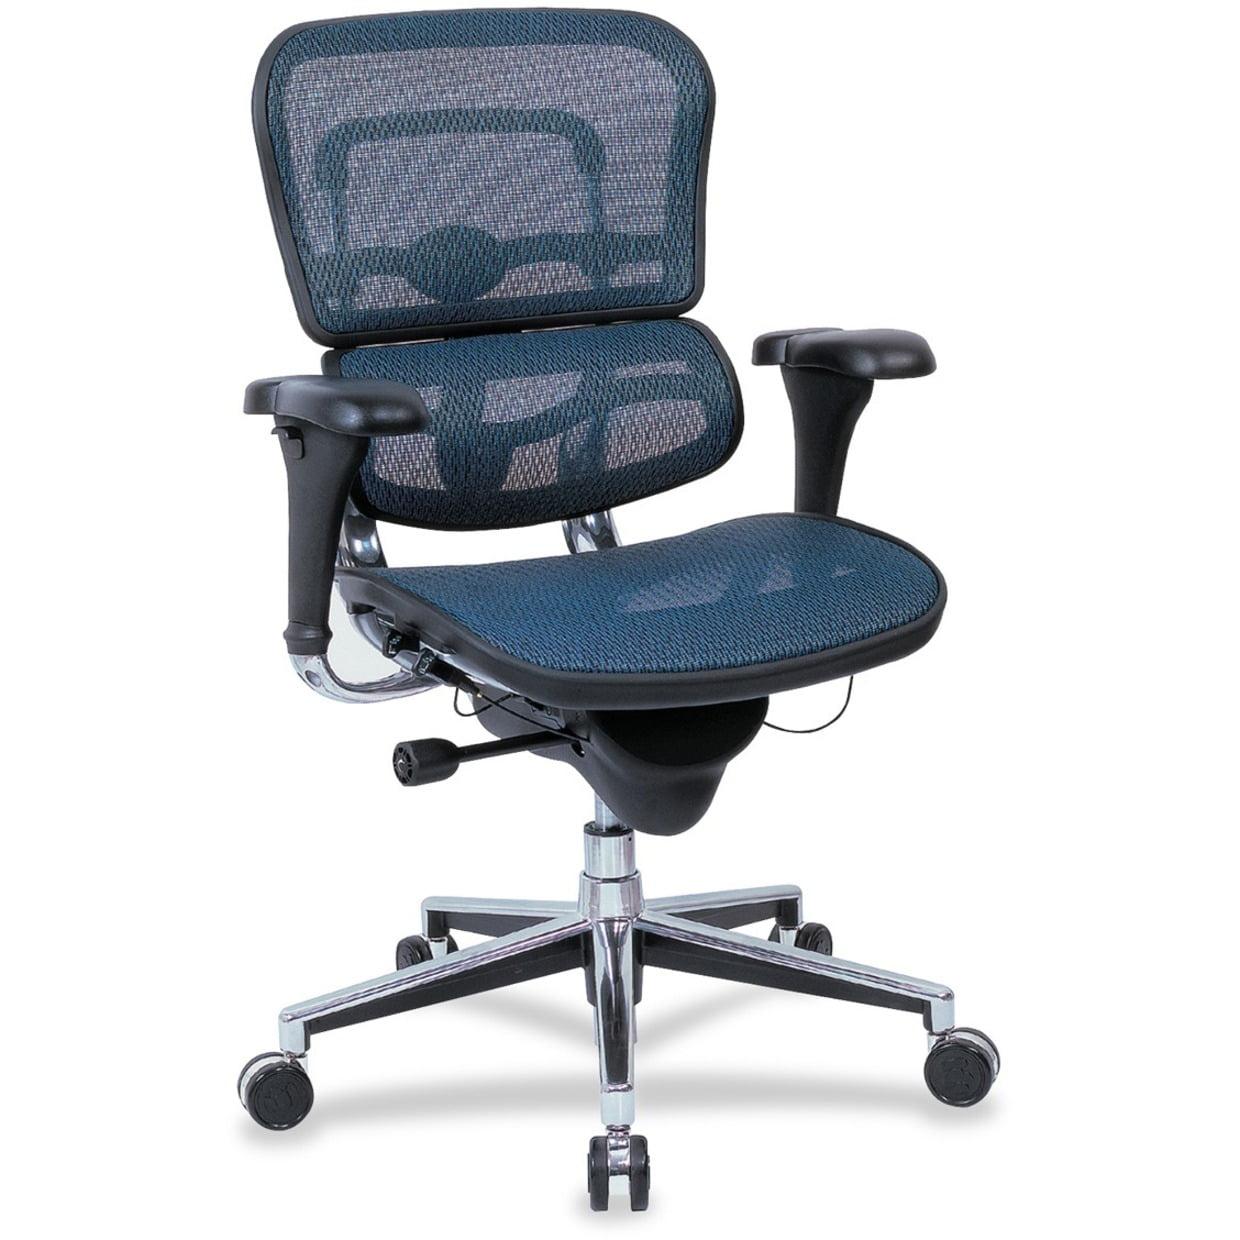 Ergohuman High Back Executive Swivel Chair with Adjustable Arms in Blue Mesh